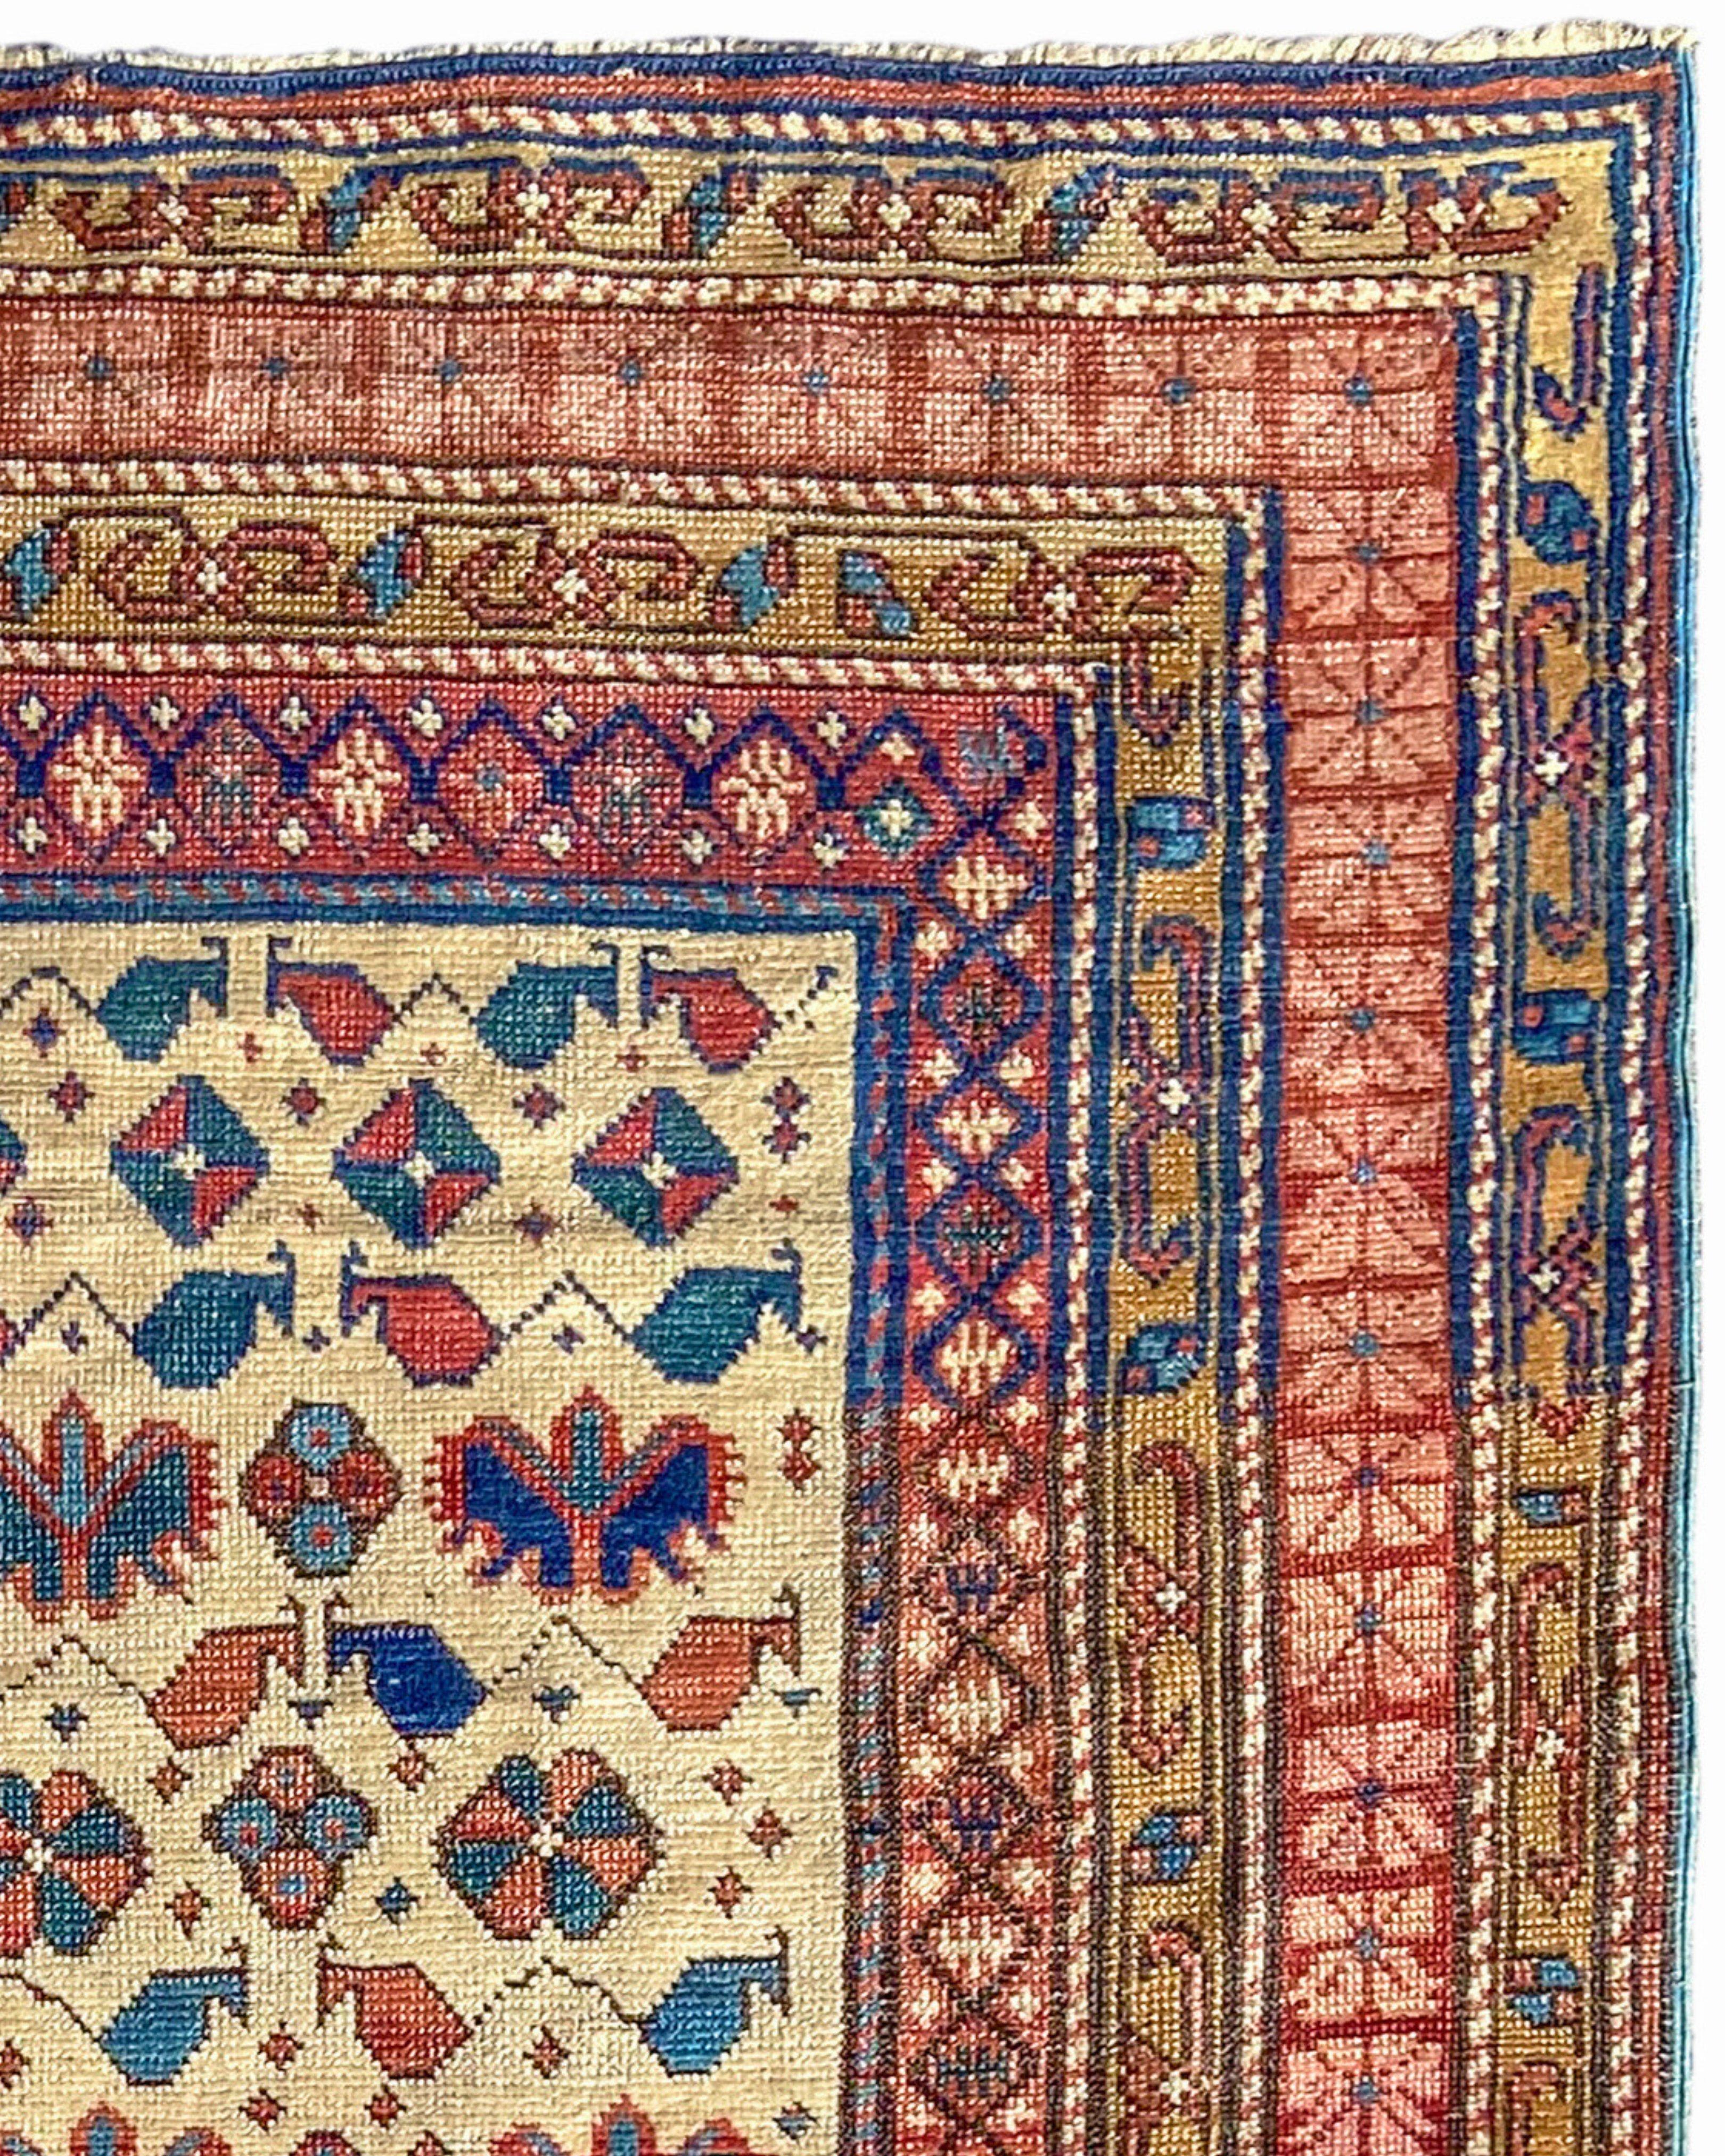 Antique Caucasian Kuba Rug, Late 19th Century

Additional Information:
Dimensions: 3'6